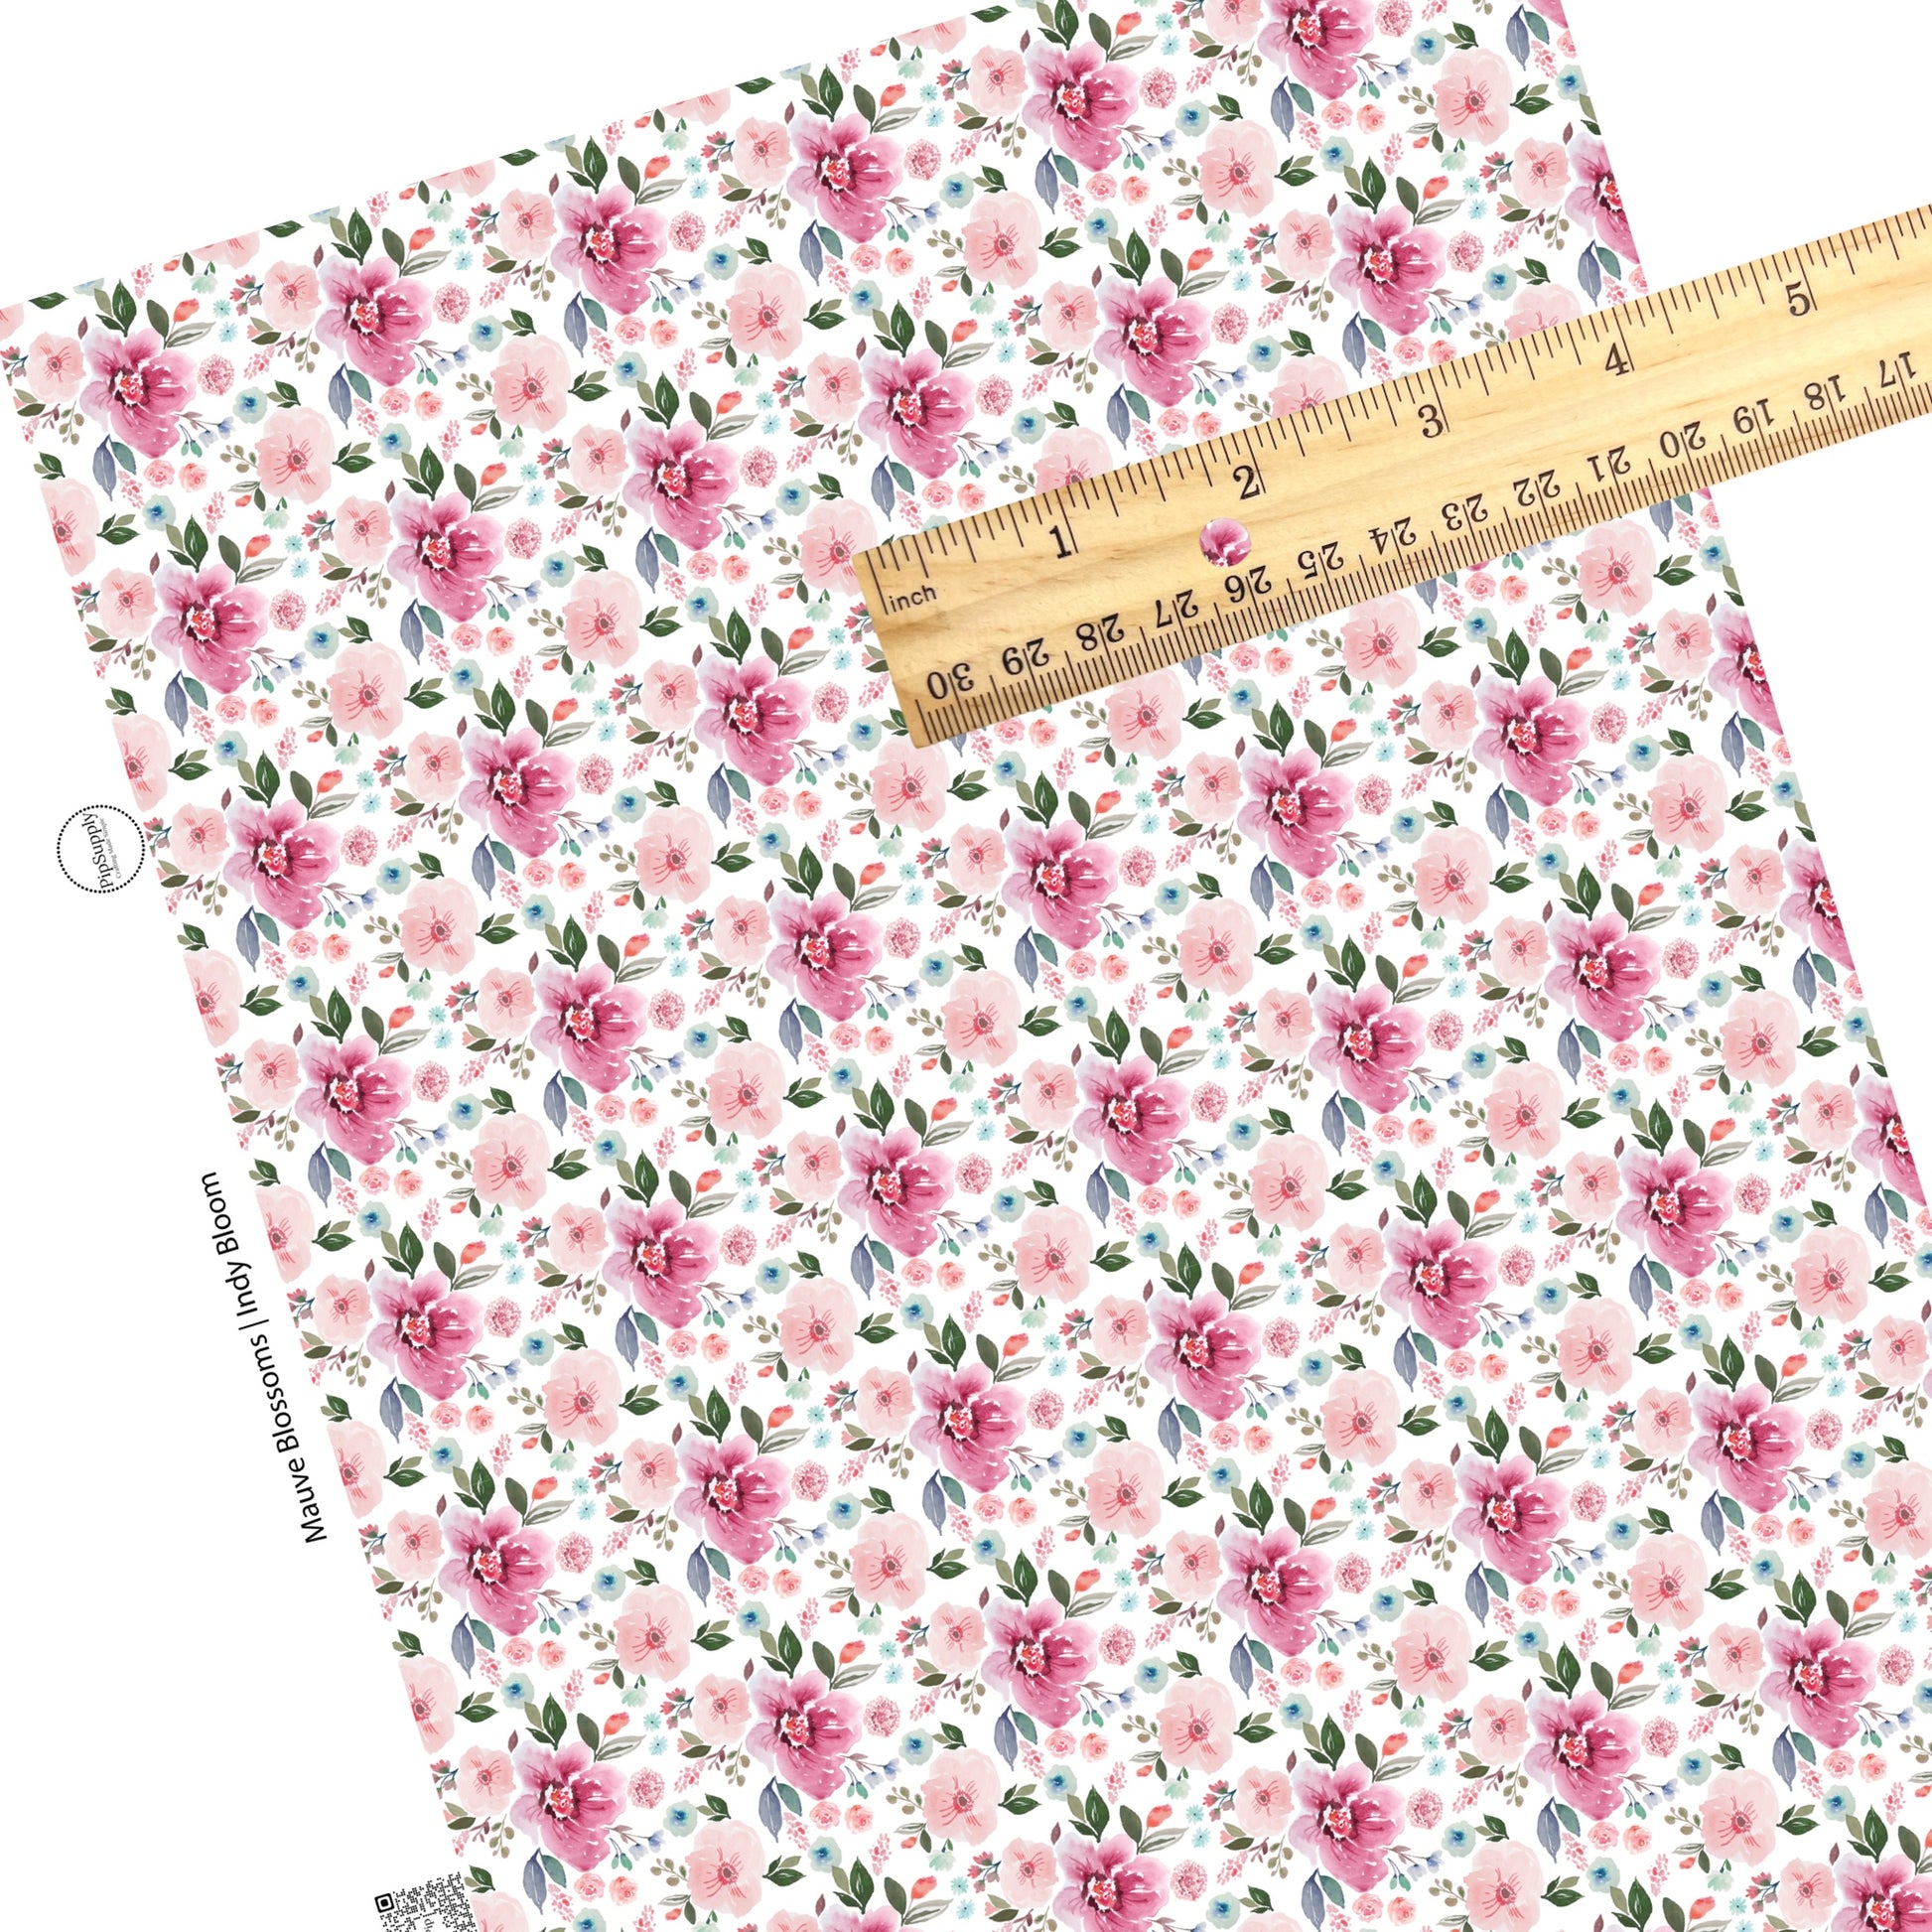 These pastel watercolor flowers on a white faux leather sheets contain the following design elements: light pink, peach, blue, teal, purple, green, and olive beautiful flowers and leaves.